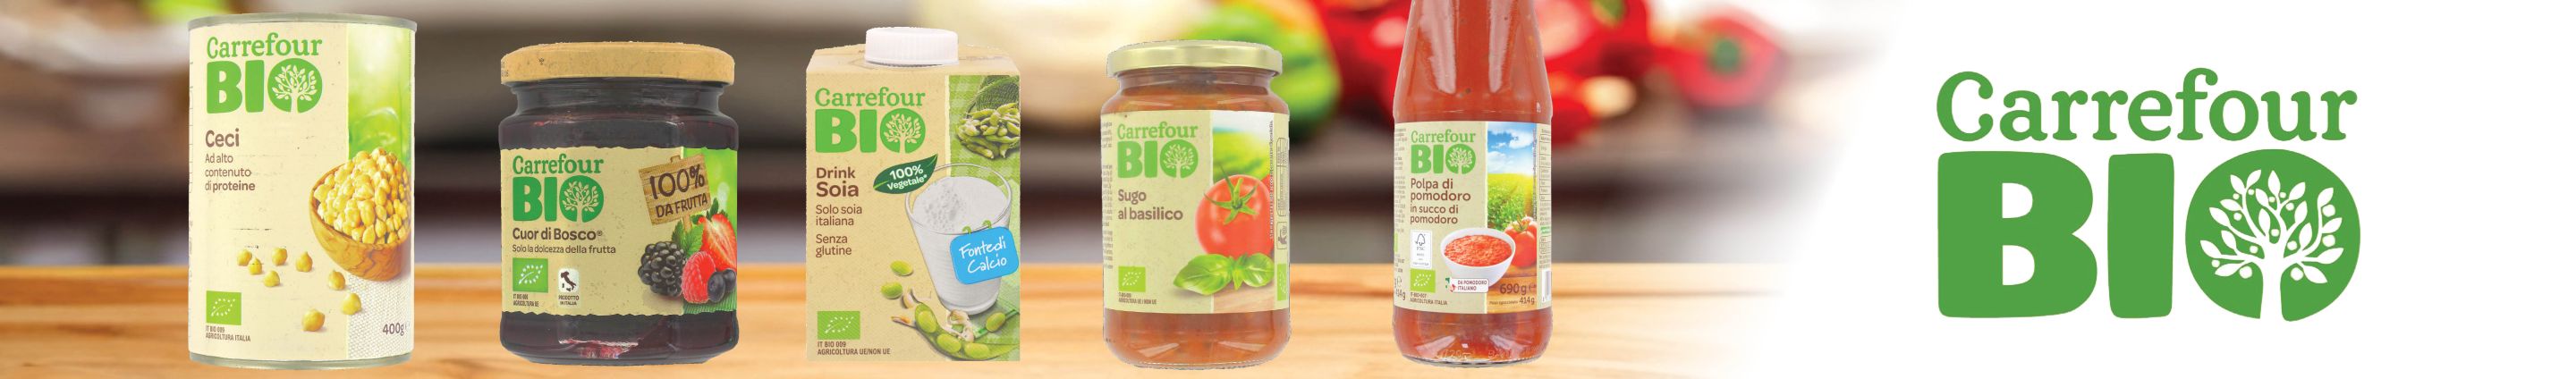 Carrefour Bio - Healthy Section